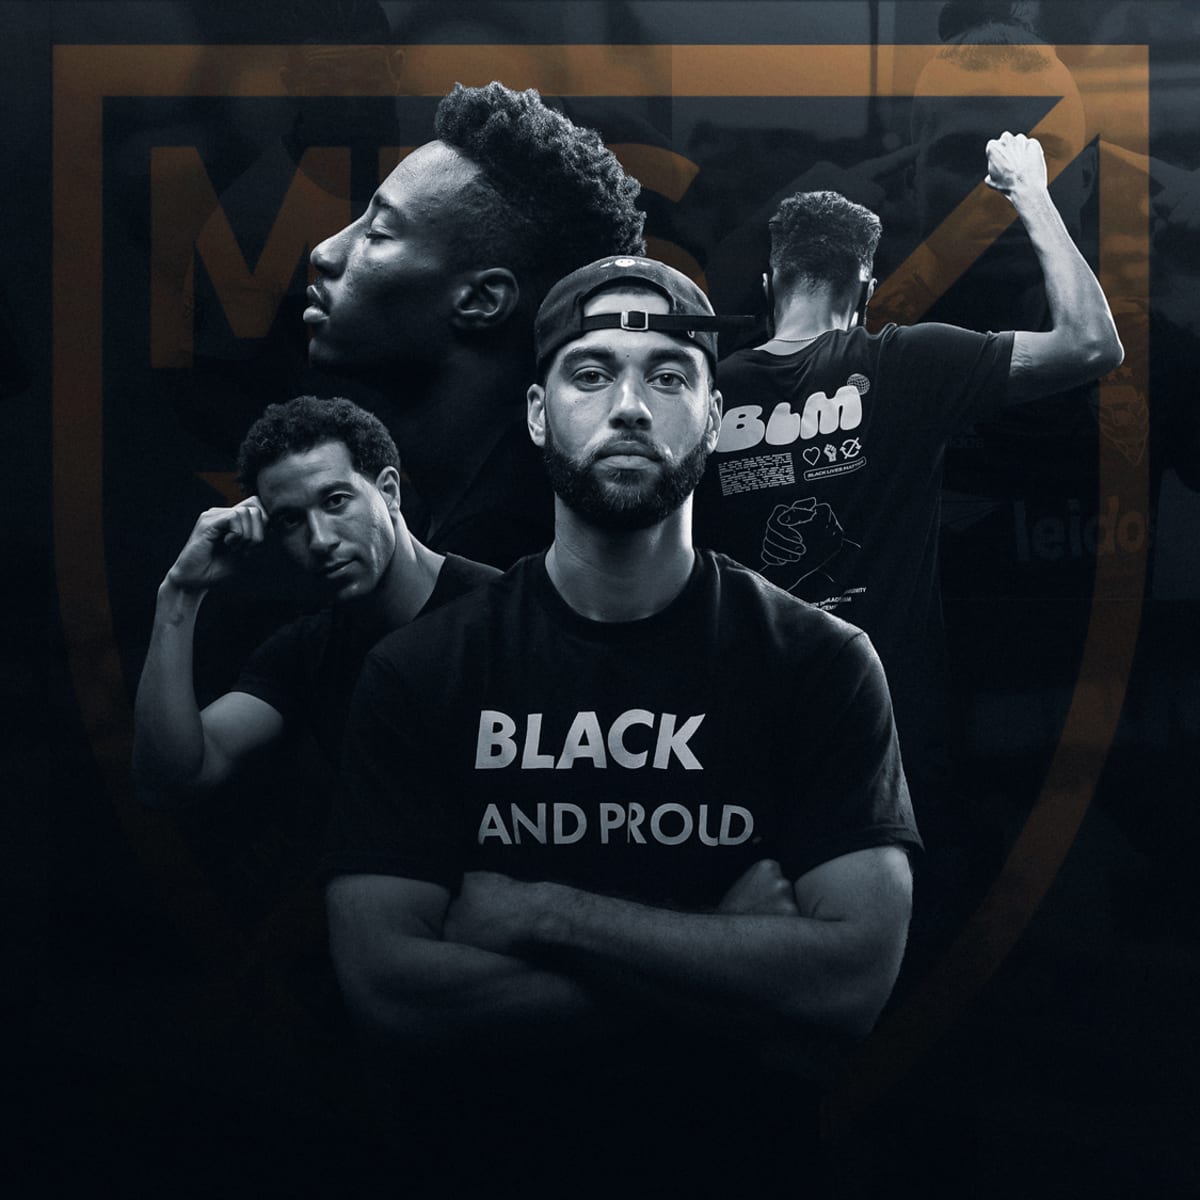 MLS and Black Players for Change Commemorate Juneteenth with